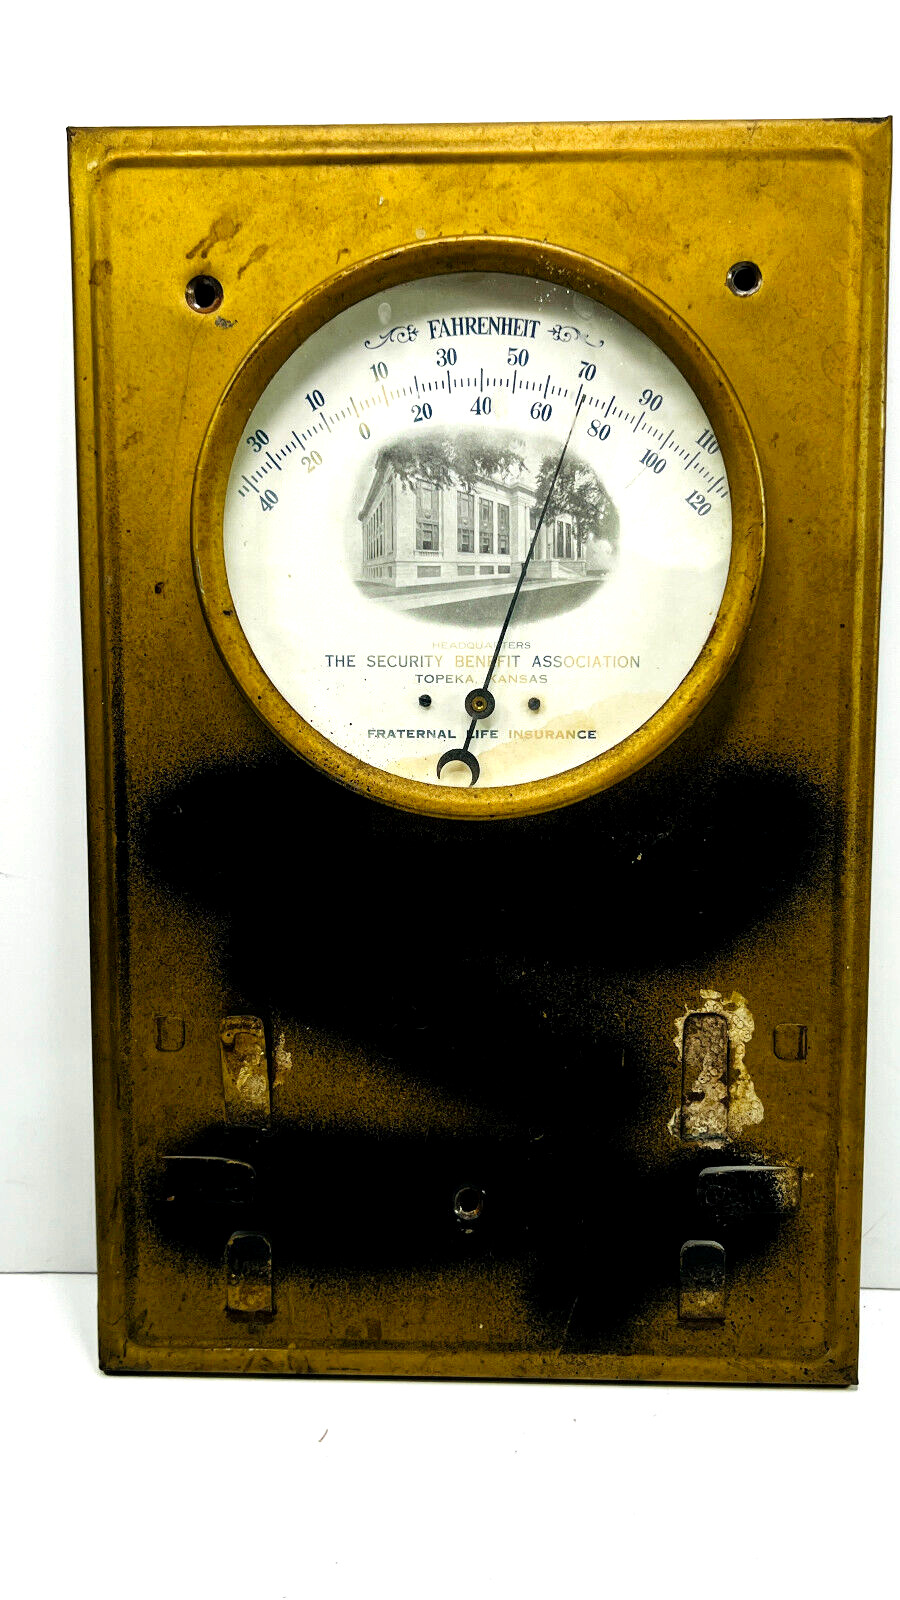 Antique Security Benefit Association Topeka KS thermometer advertising sign